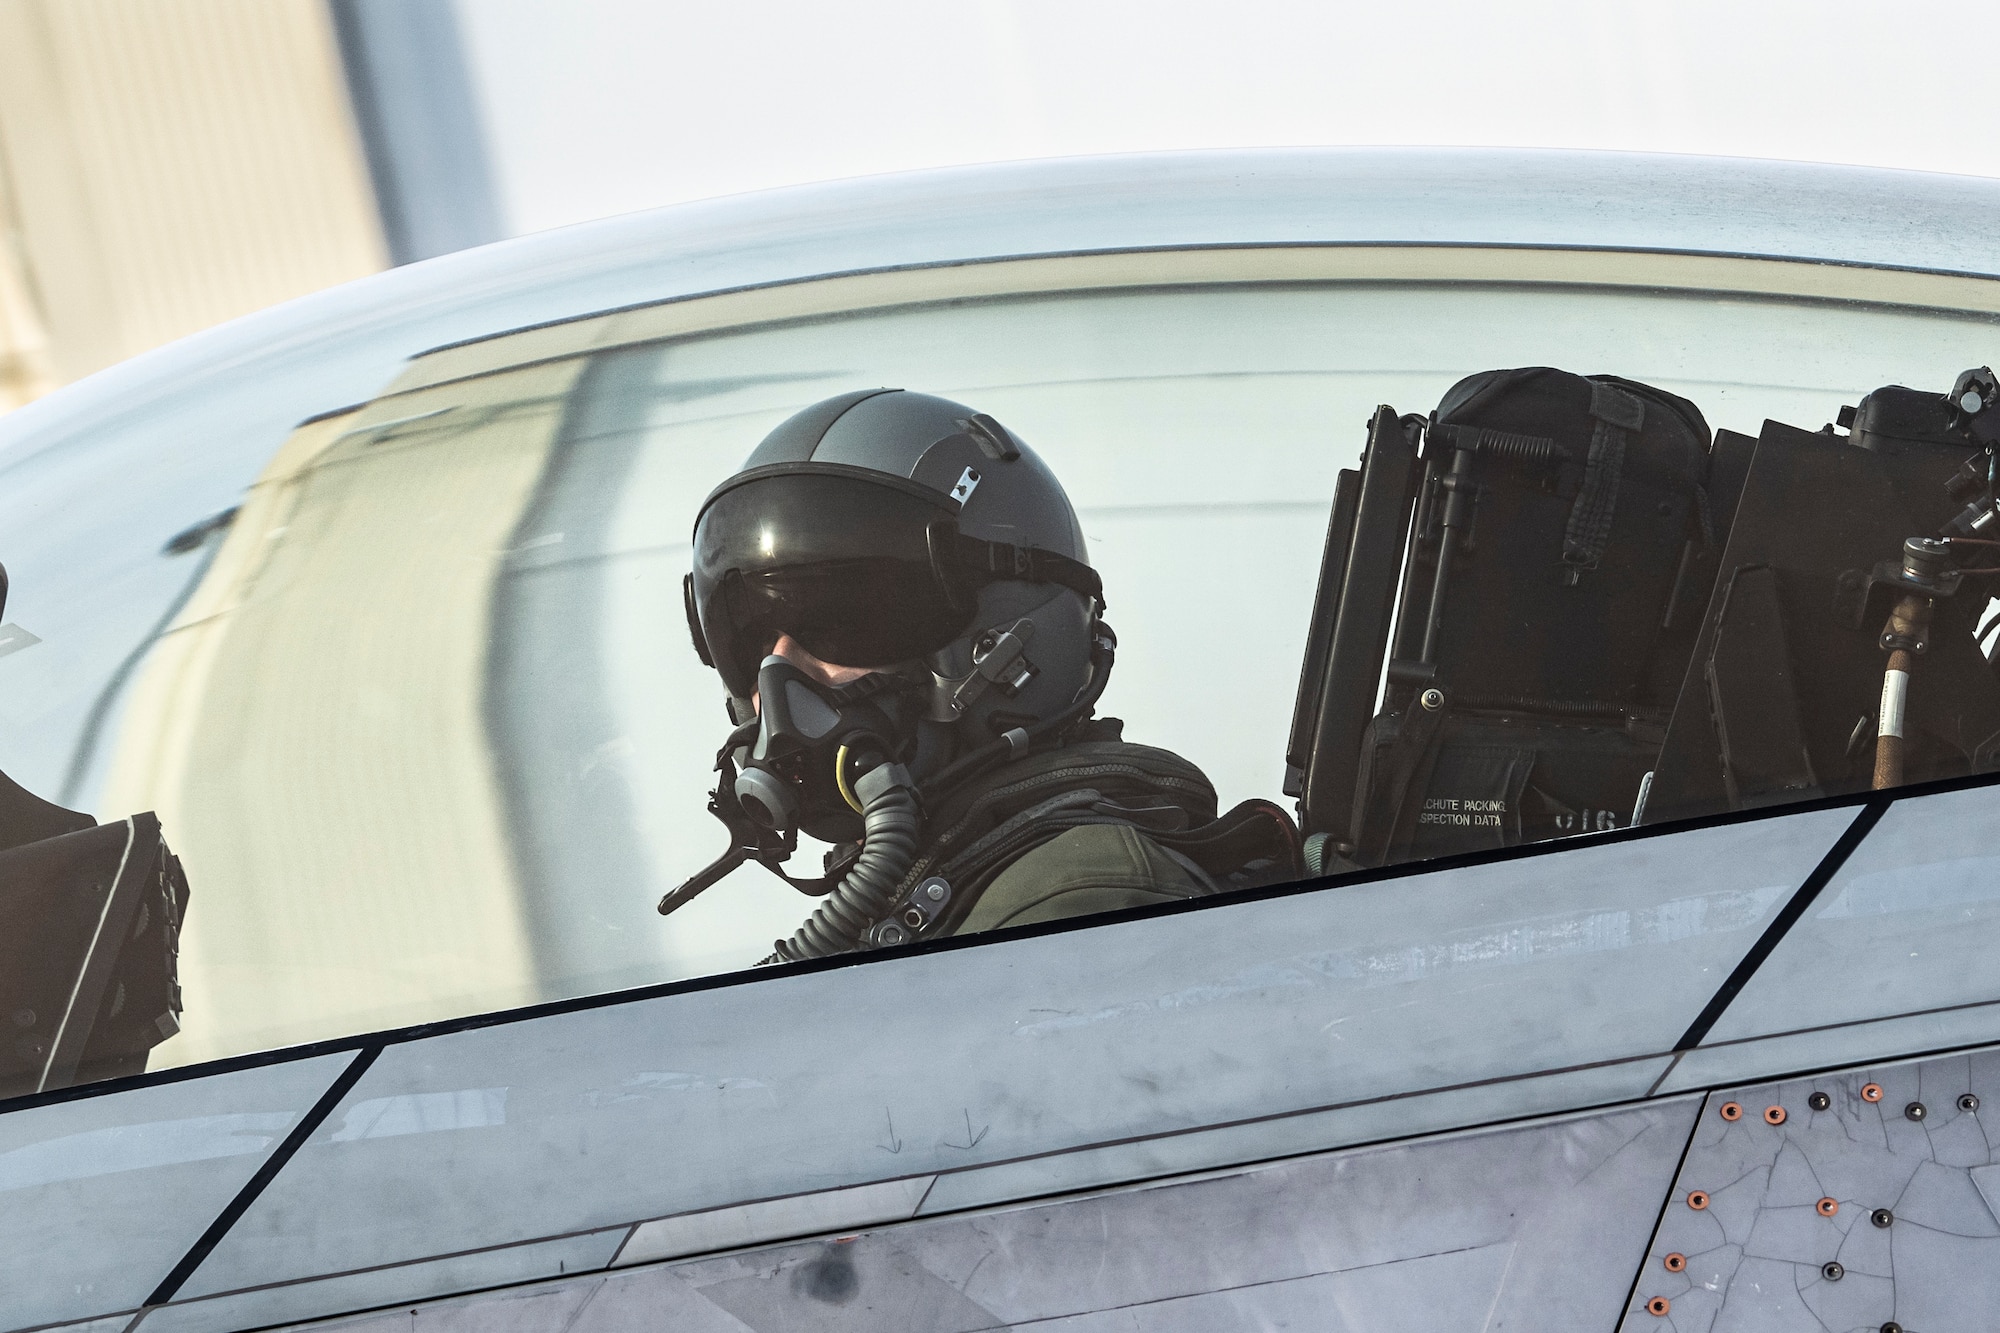 U.S. Air Force Lt. Col. Philip Johnson looking out from the cockpit of an F-22 Raptor fighter jet